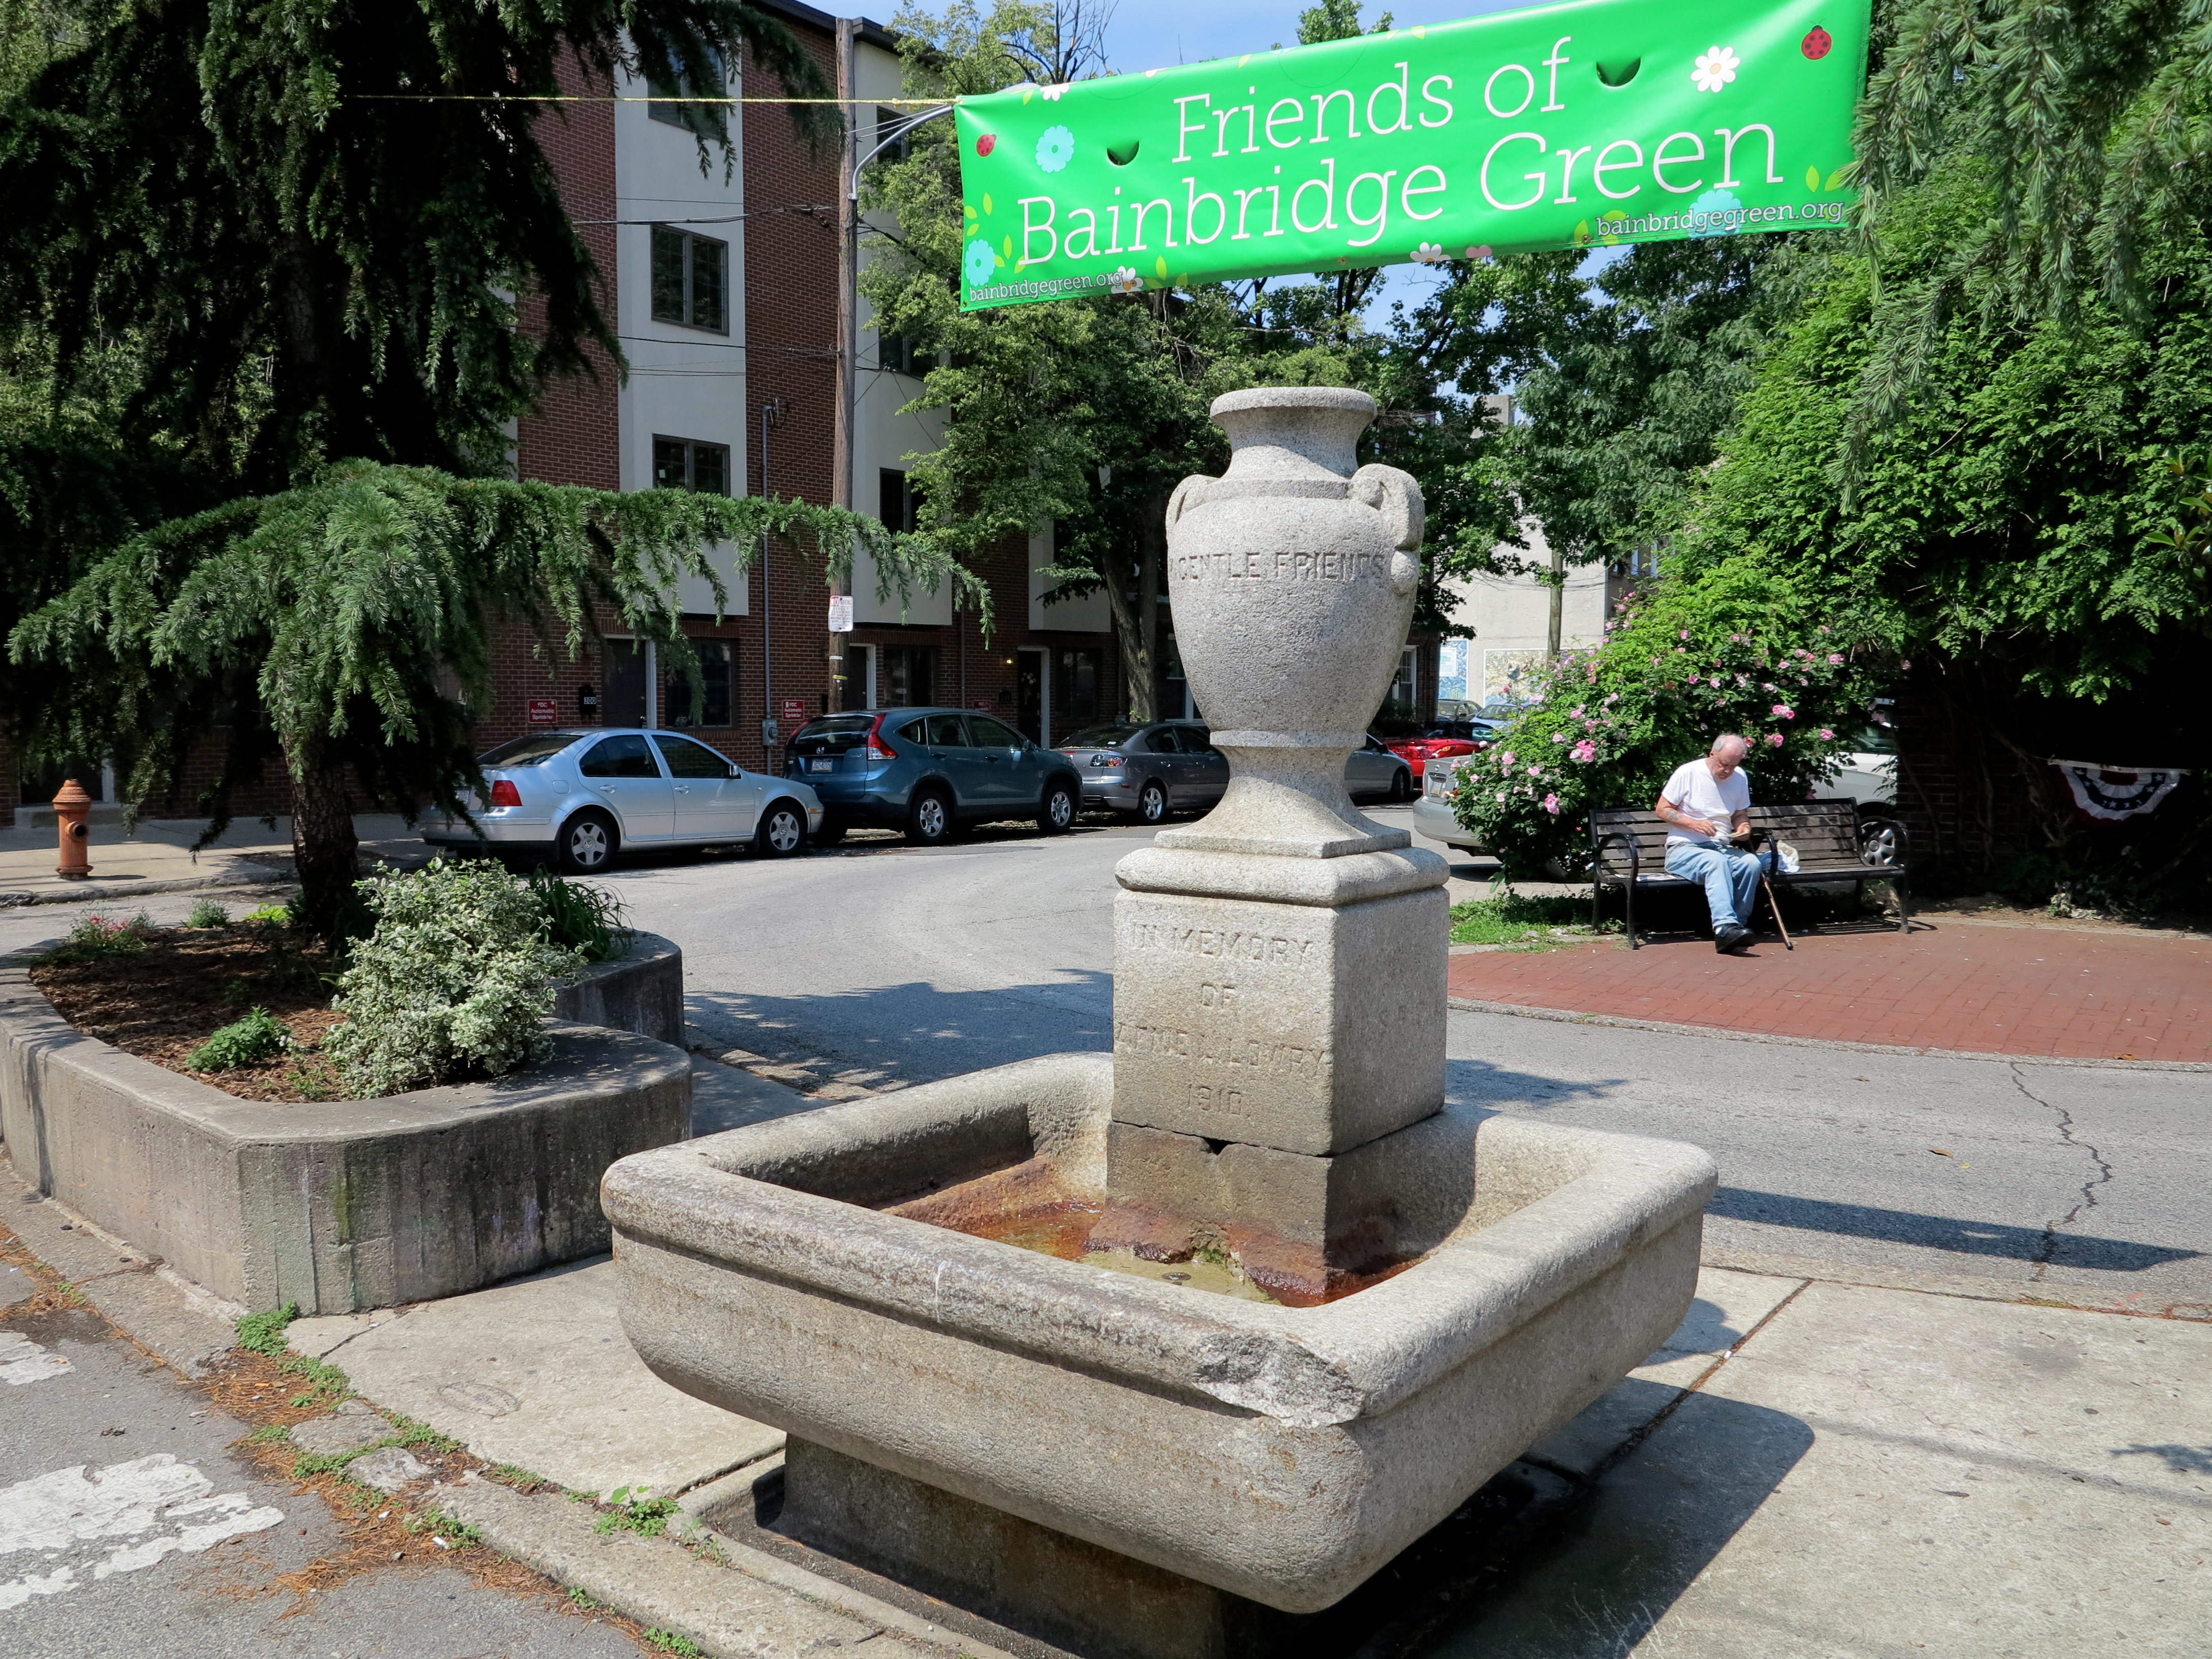 Drink Gentle Friends - This trough and fountain at Bainbridge Green was installed in 1910.